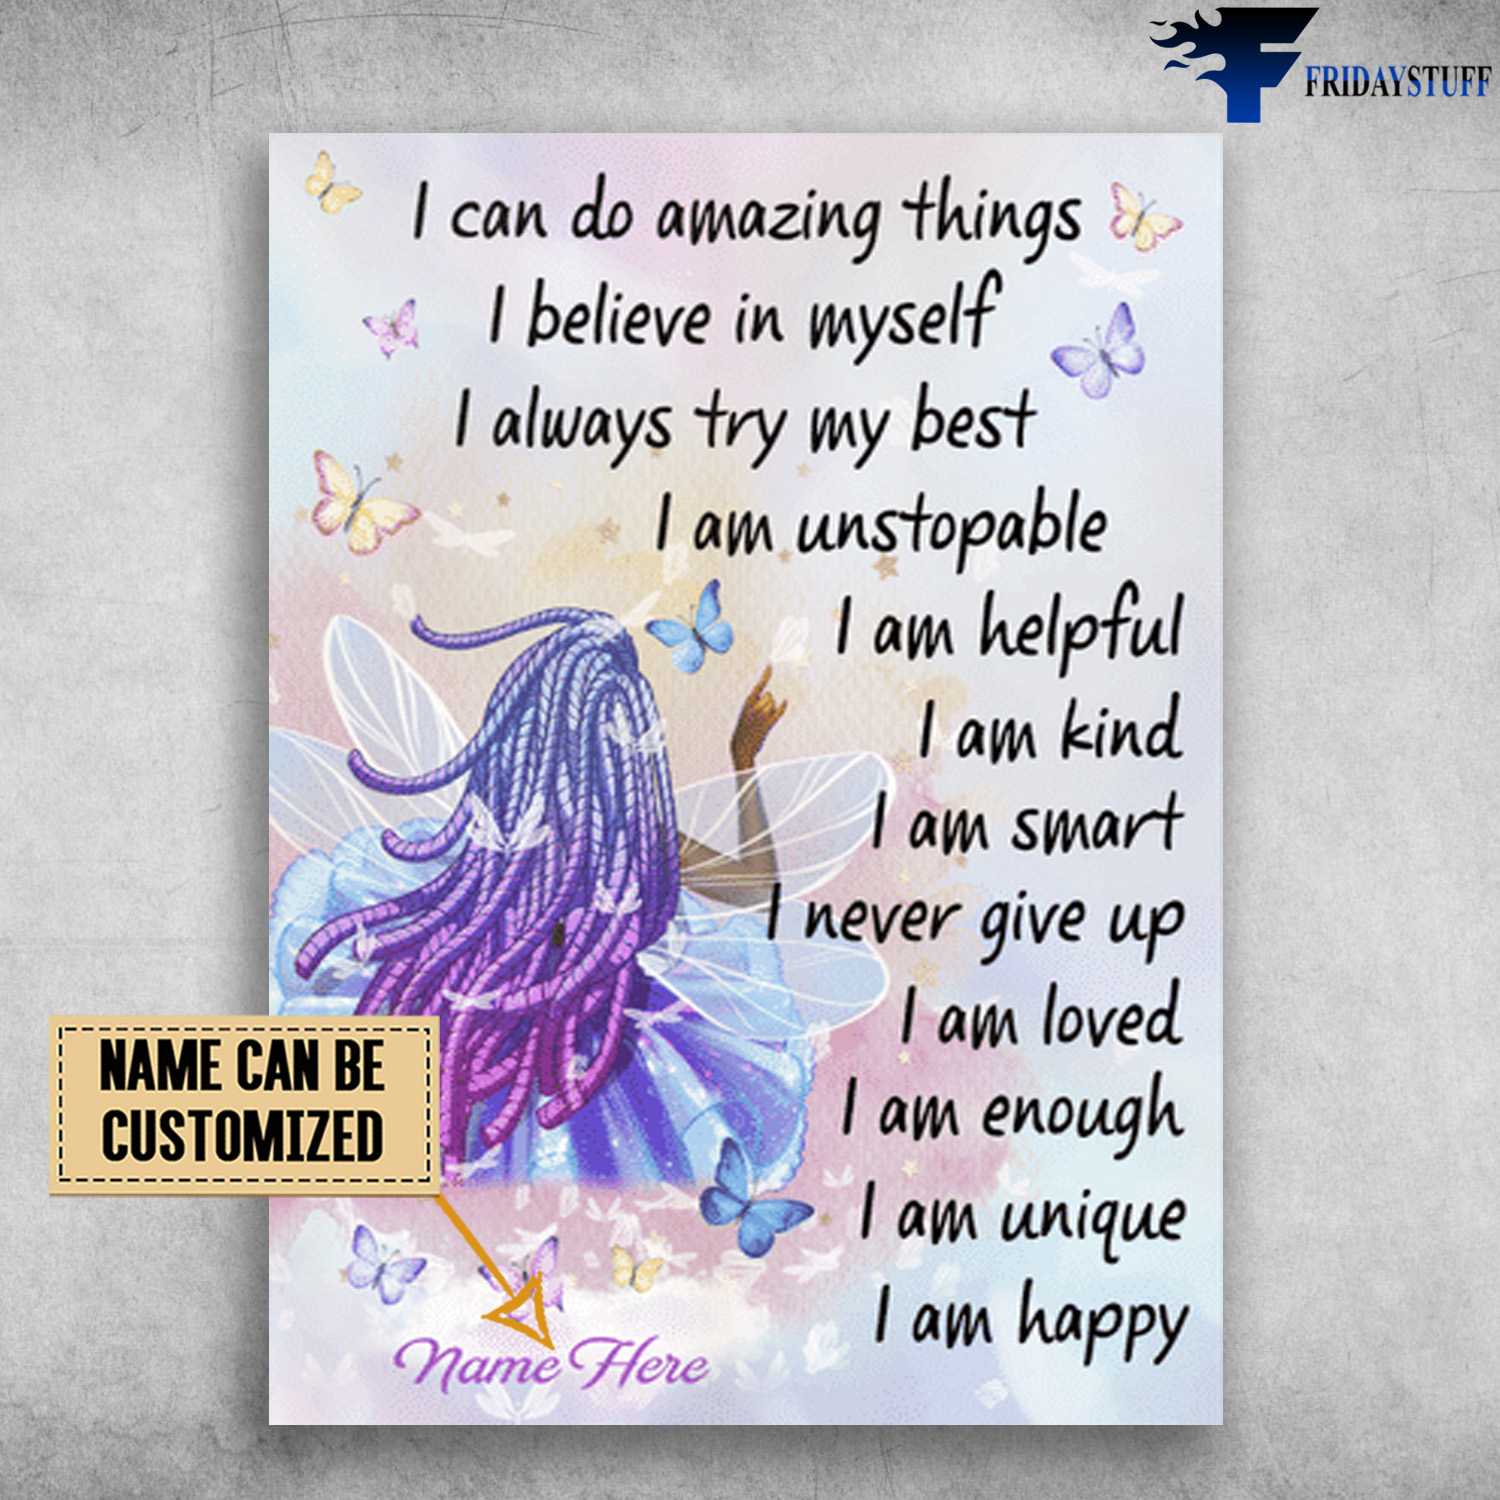 Fairies Poster, I Can Do Amazing Things, I Believe In Myself, I Always Try My Best, I Am Unstopable, I Am Helpful, I Am Kind, I Am Smart, I Never Give Up